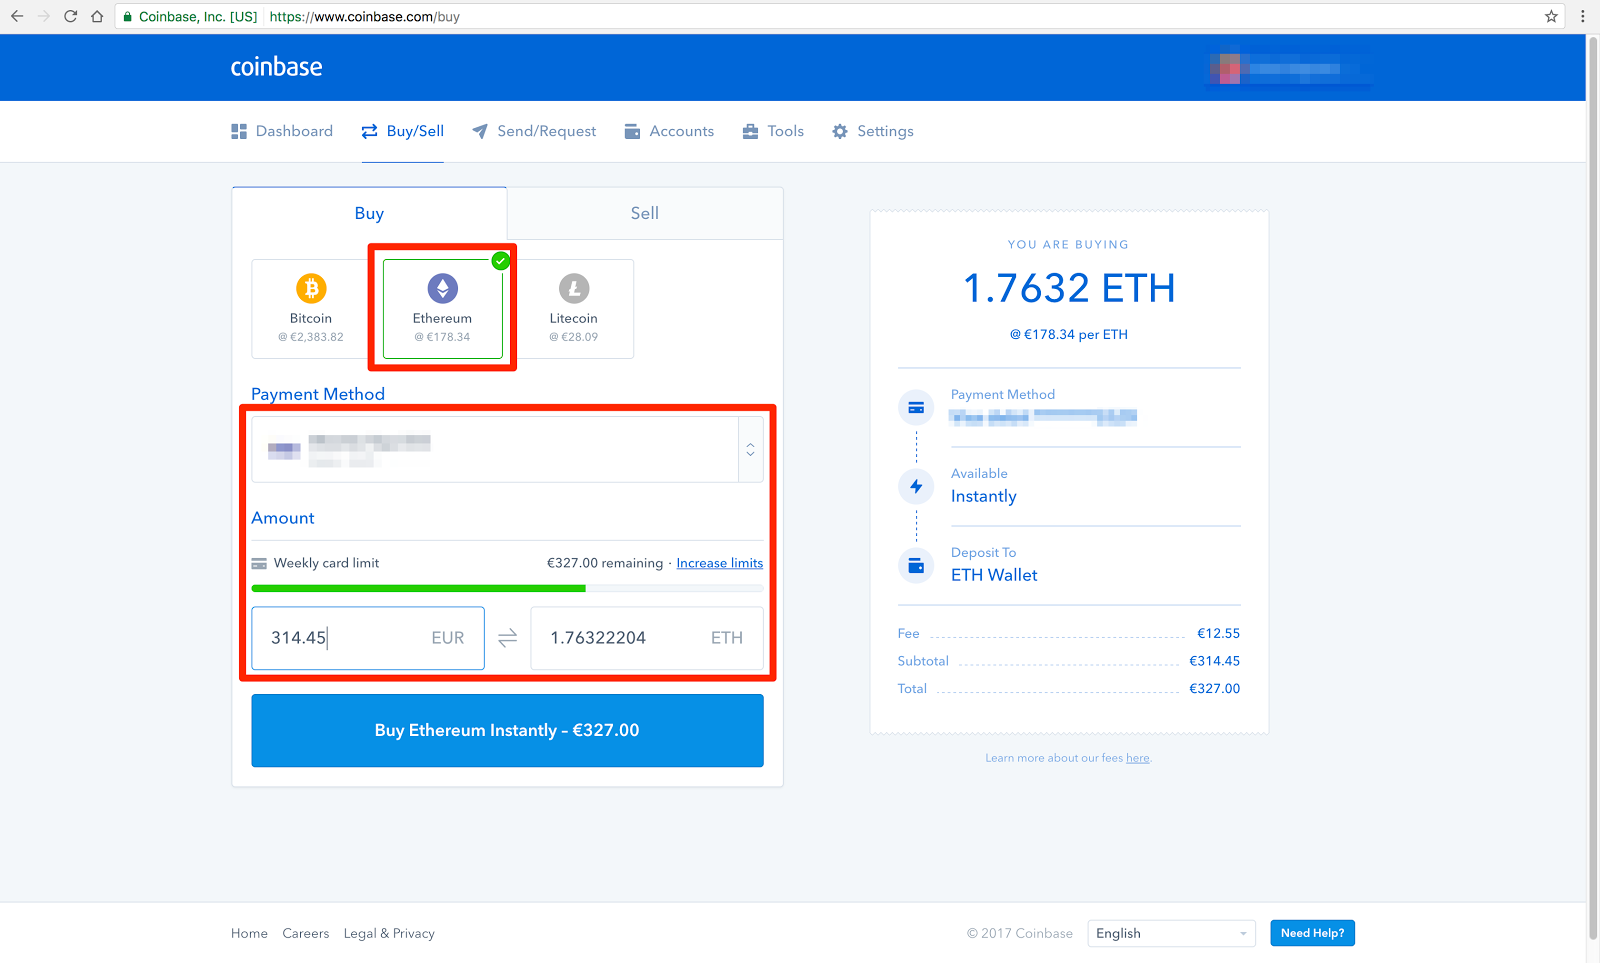 How To Buy From Coinbase Account Frozen Ethereum Compositing Pro - 